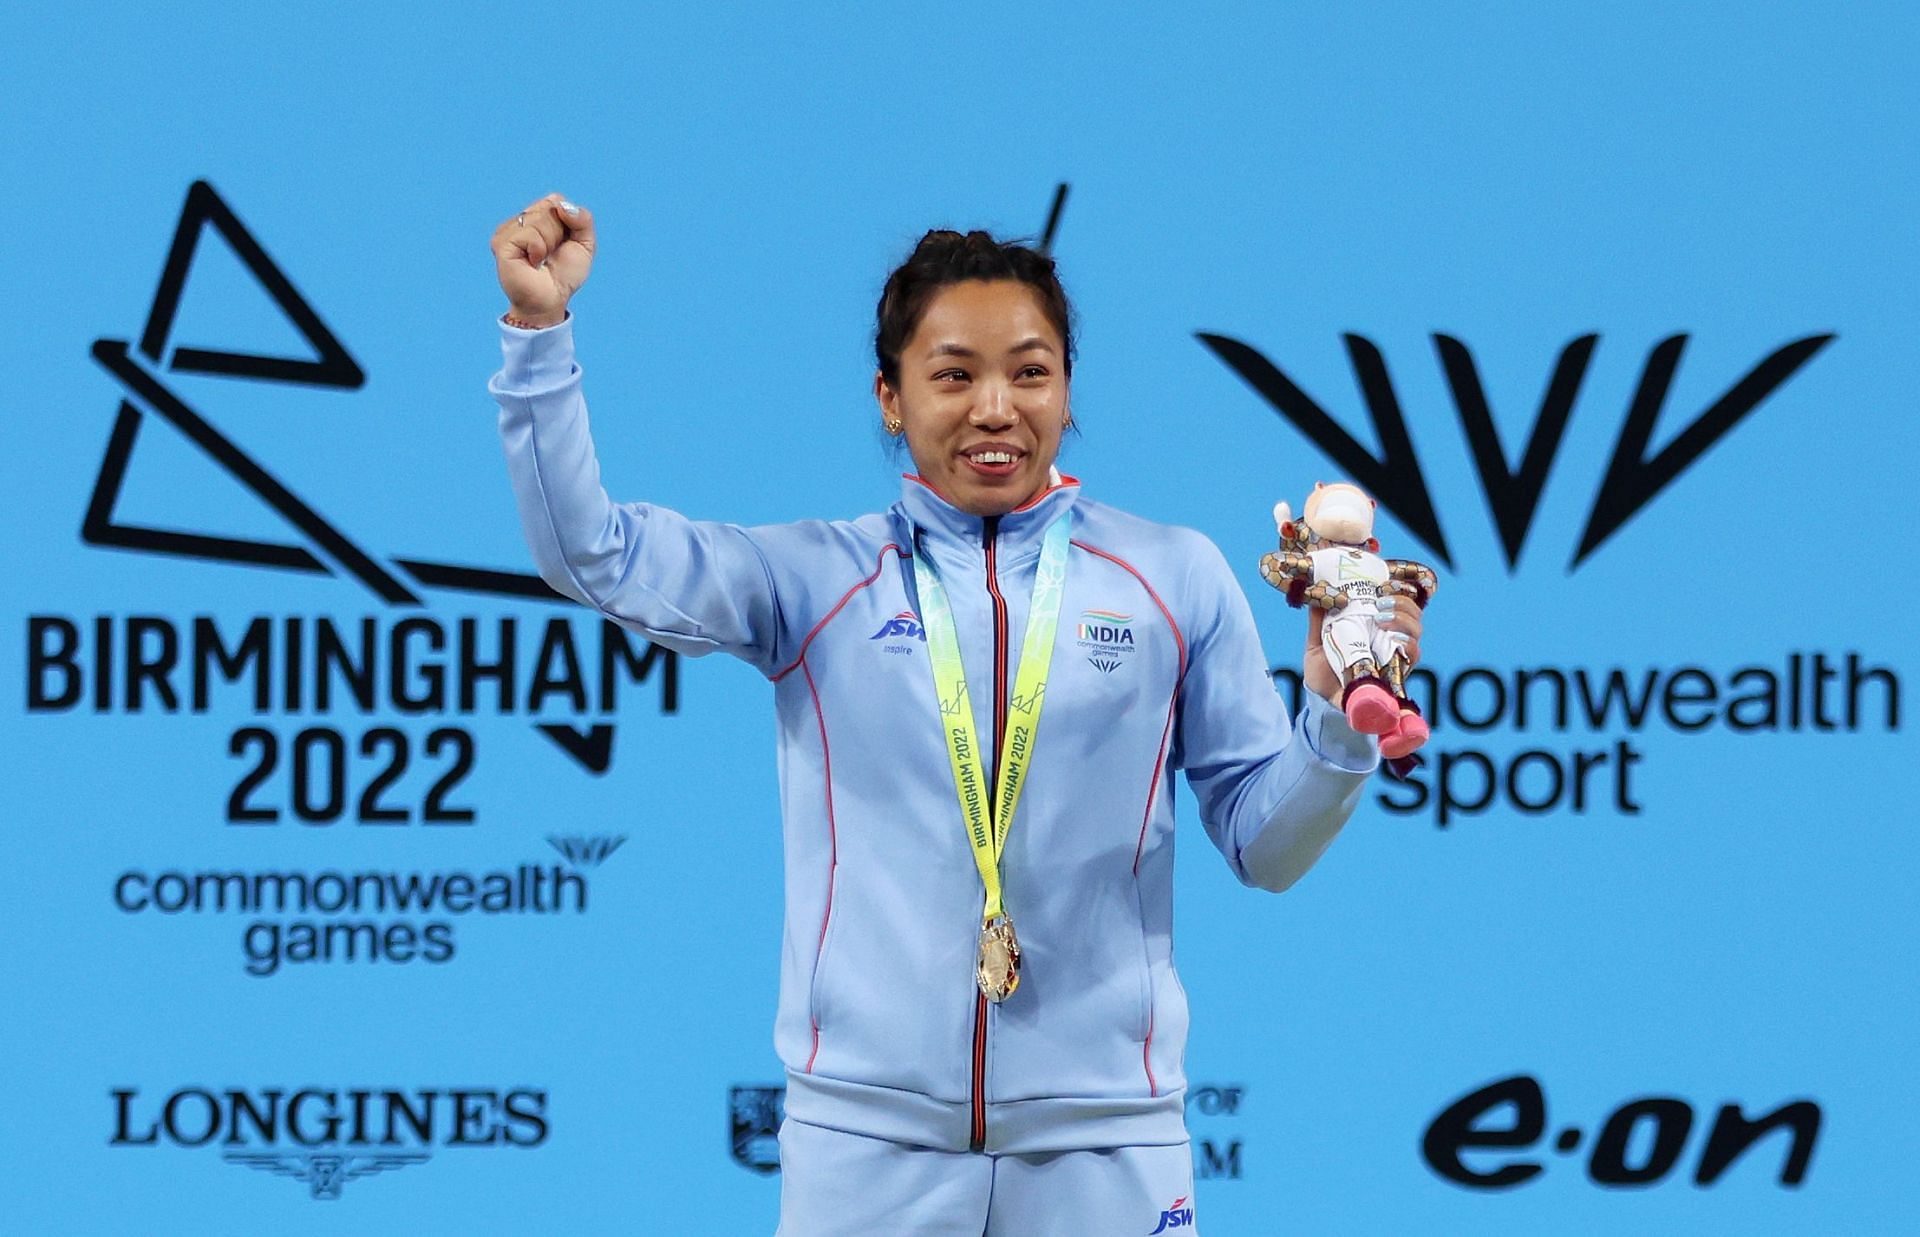 Mirabai Chanu exults on the podium after the medal ceremony. (PC: Getty Images)